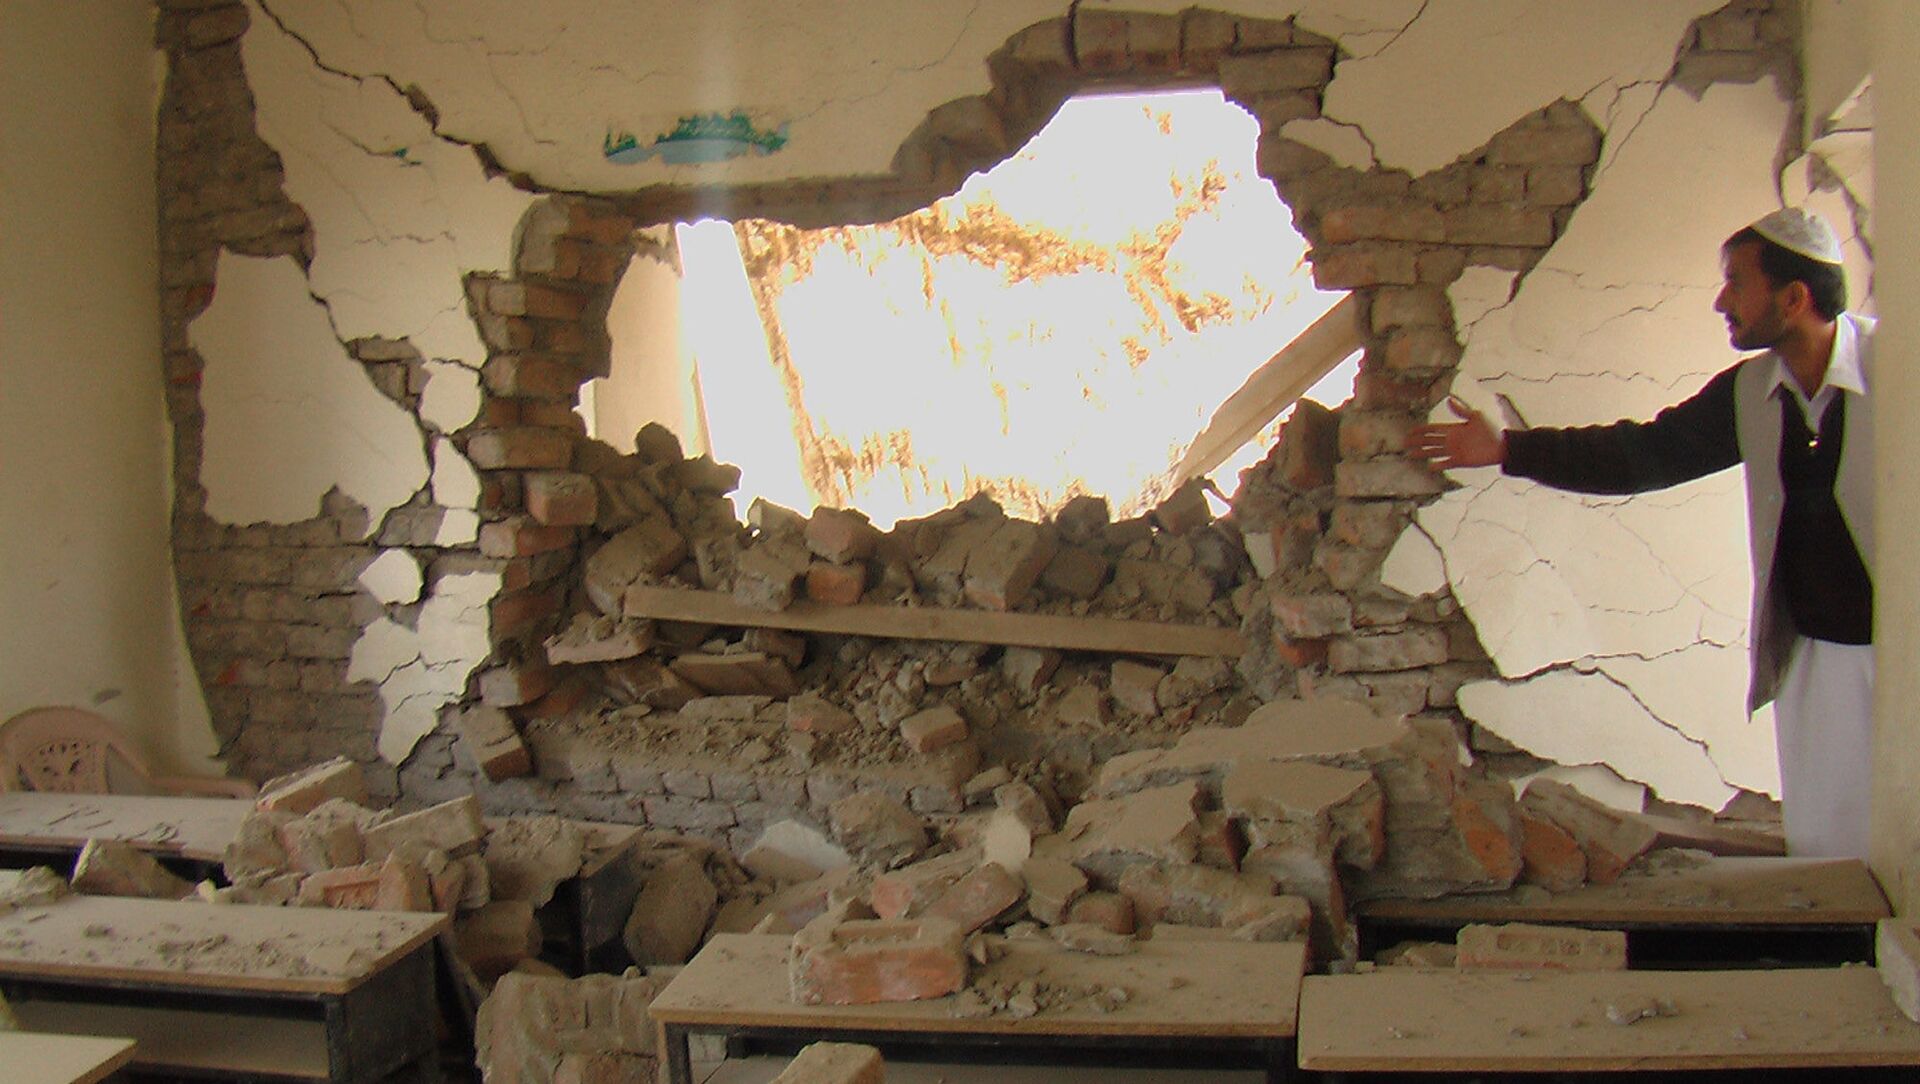 An Afghan man shows a destroyed class room after it was blown up with explosives in Mandozai, in Khost province, Afghanistan, Wednesday, Nov 19, 2008. Chief education officer of Khost province stated that the school was destroyed using explosives by the enemies of Afghanistan.(AP Photo/Nashanuddin Khan) - 俄罗斯卫星通讯社, 1920, 19.08.2021